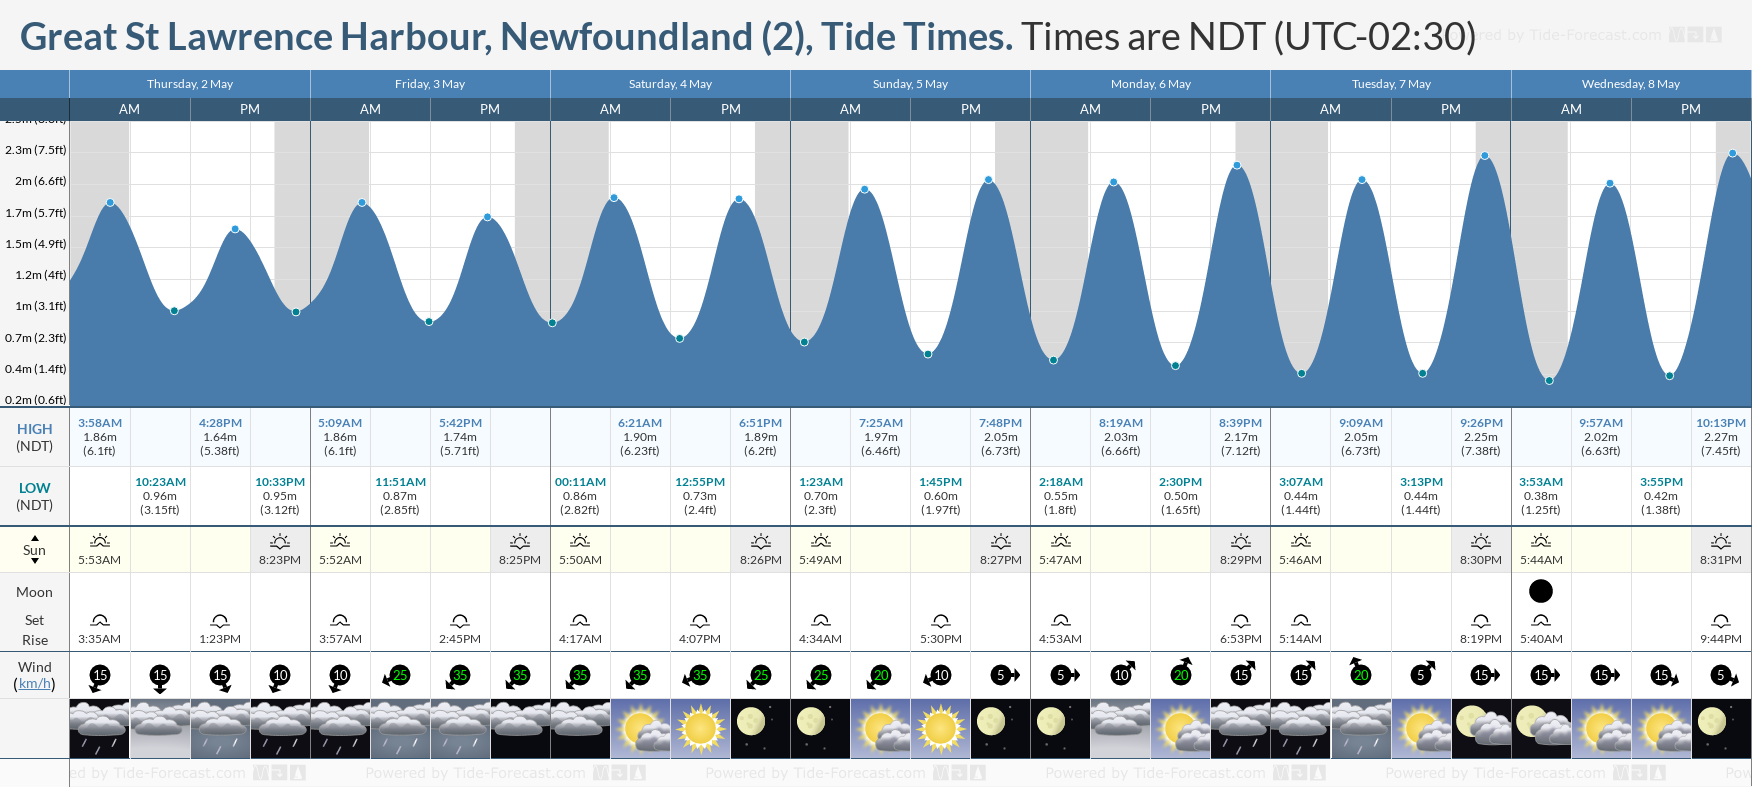 Great St Lawrence Harbour, Newfoundland (2) Tide Chart including high and low tide tide times for the next 7 days